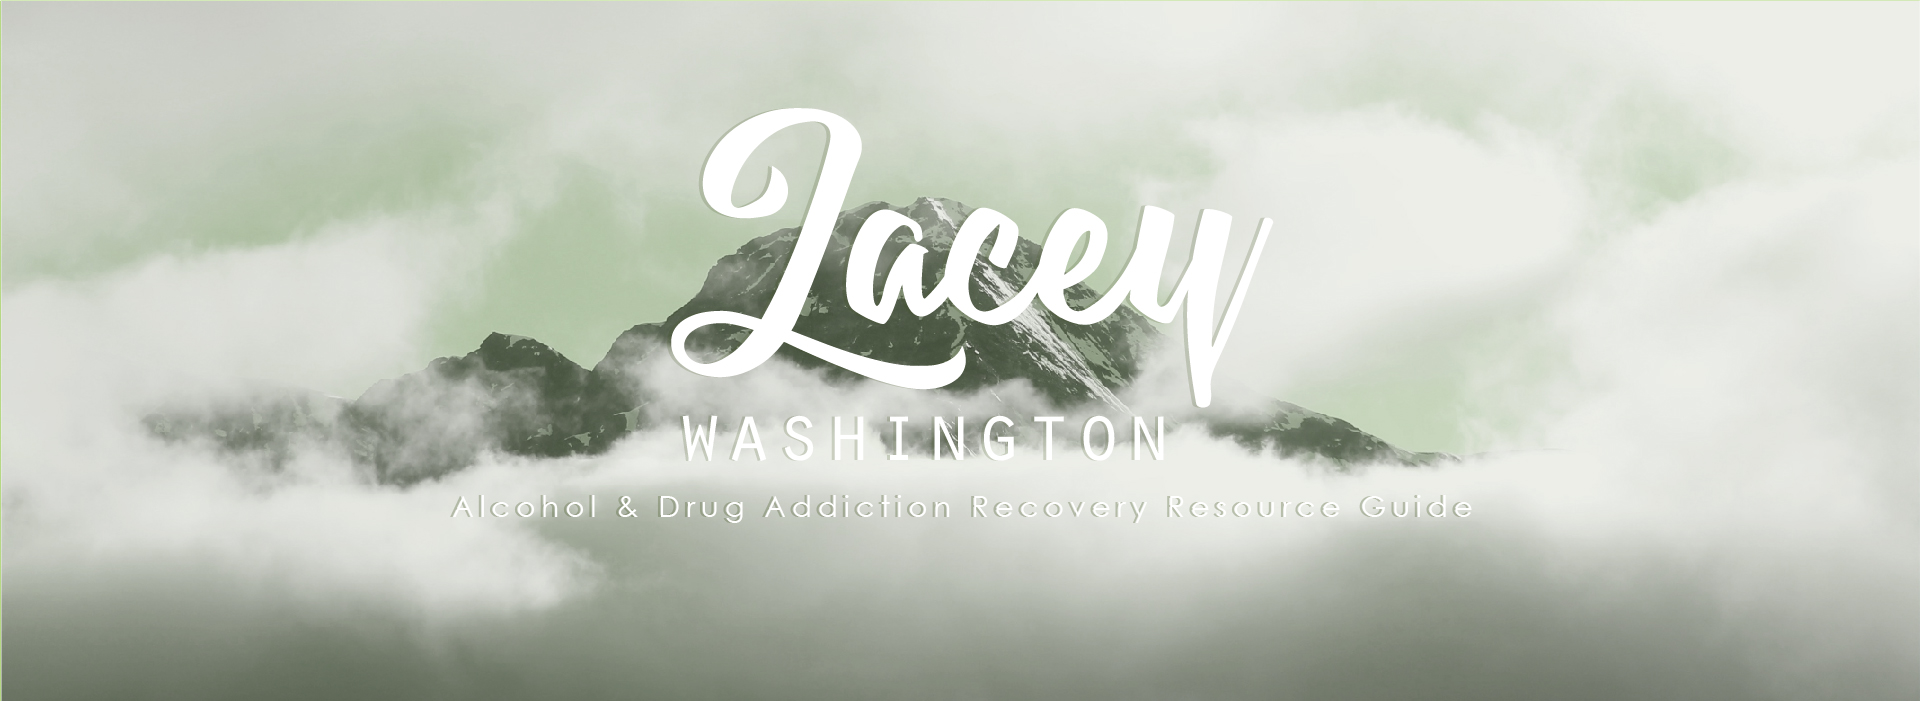 Lacey, Washington, alcohol and drug addiction recovery resource guide